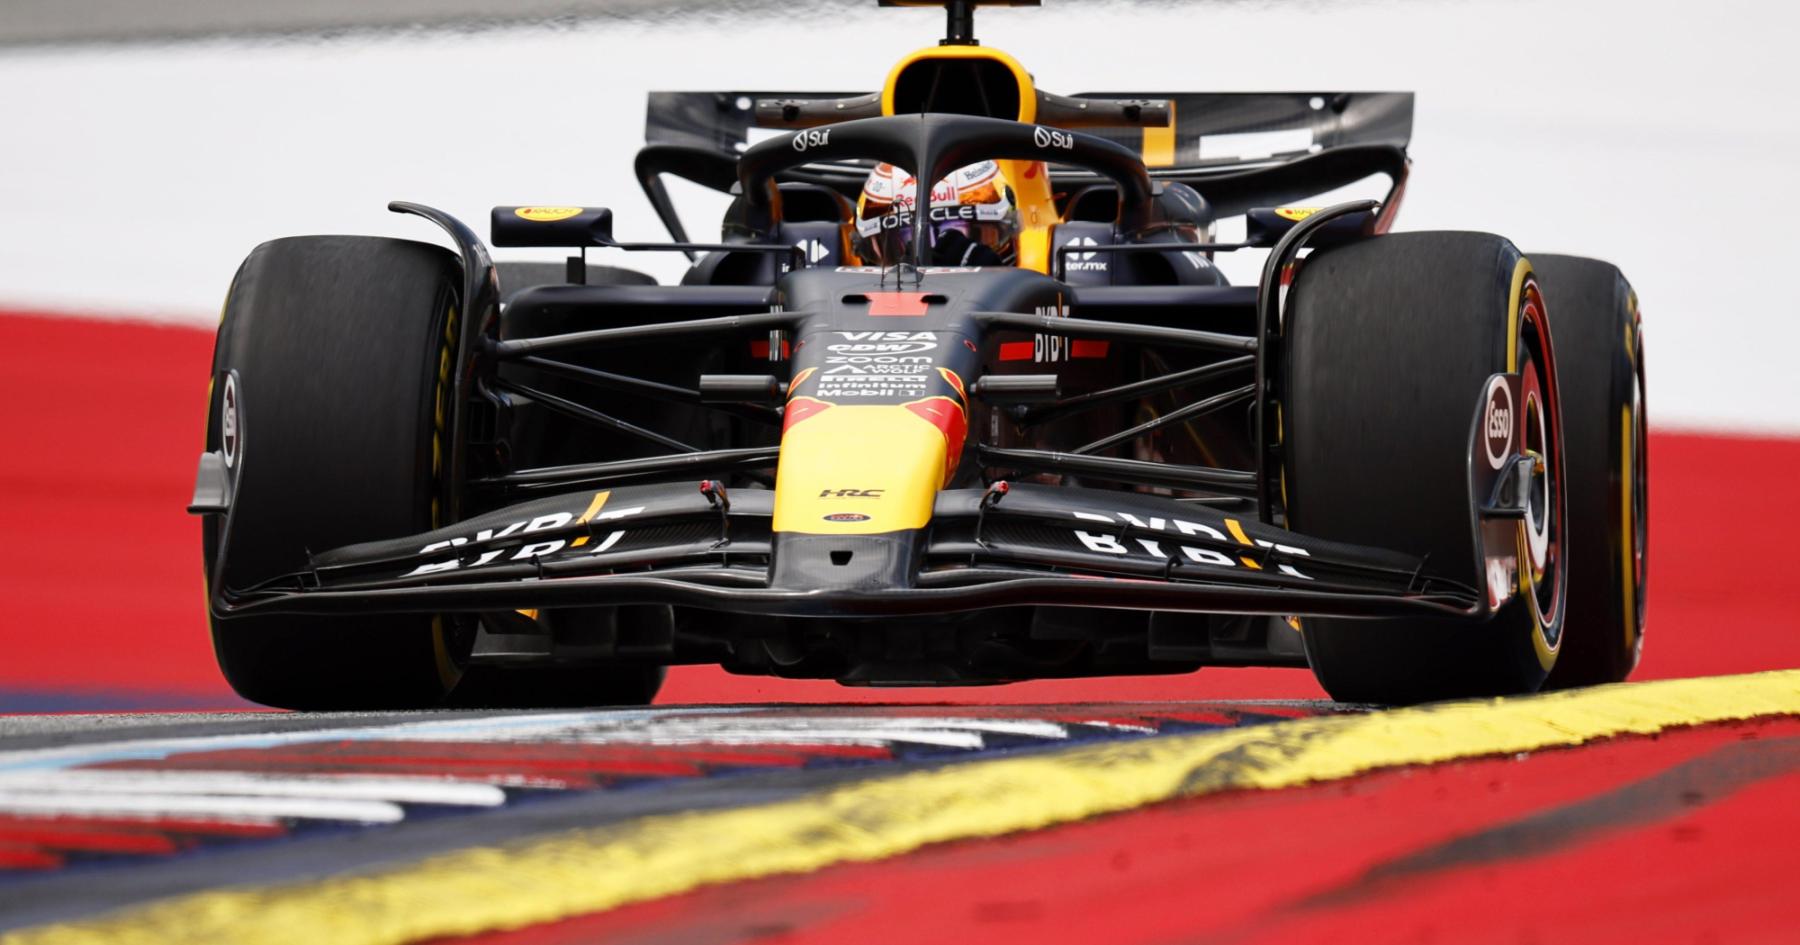 The Thunder of the Bulls: Verstappen Equipped with a Powerful New Arsenal to Take on Norris